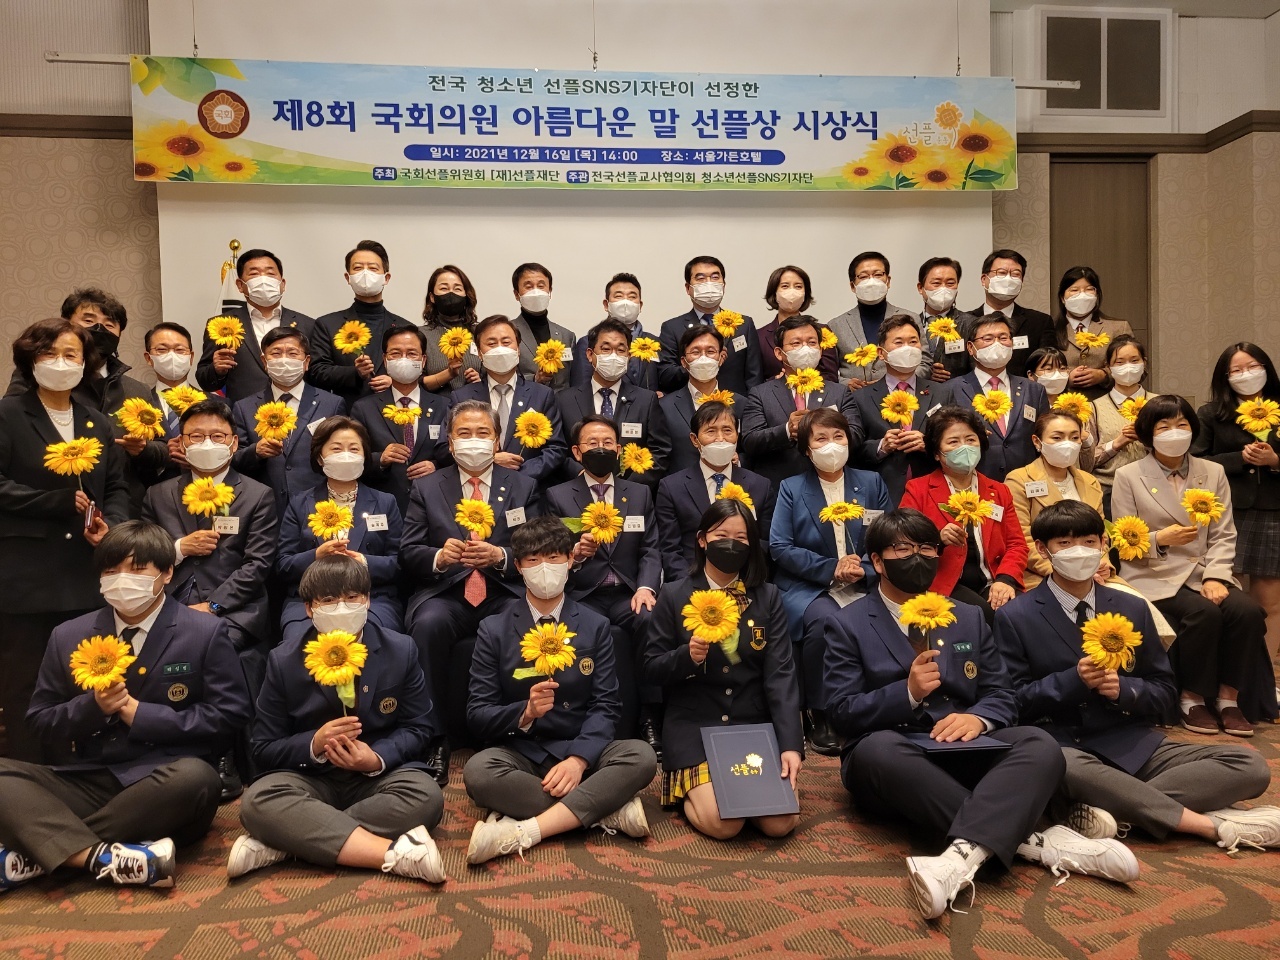 The Sunfull Foundation holds a ceremony to present an award in collaboration with the National Assembly to 61 lawmakers who make positive remarks on Dec. 16. 